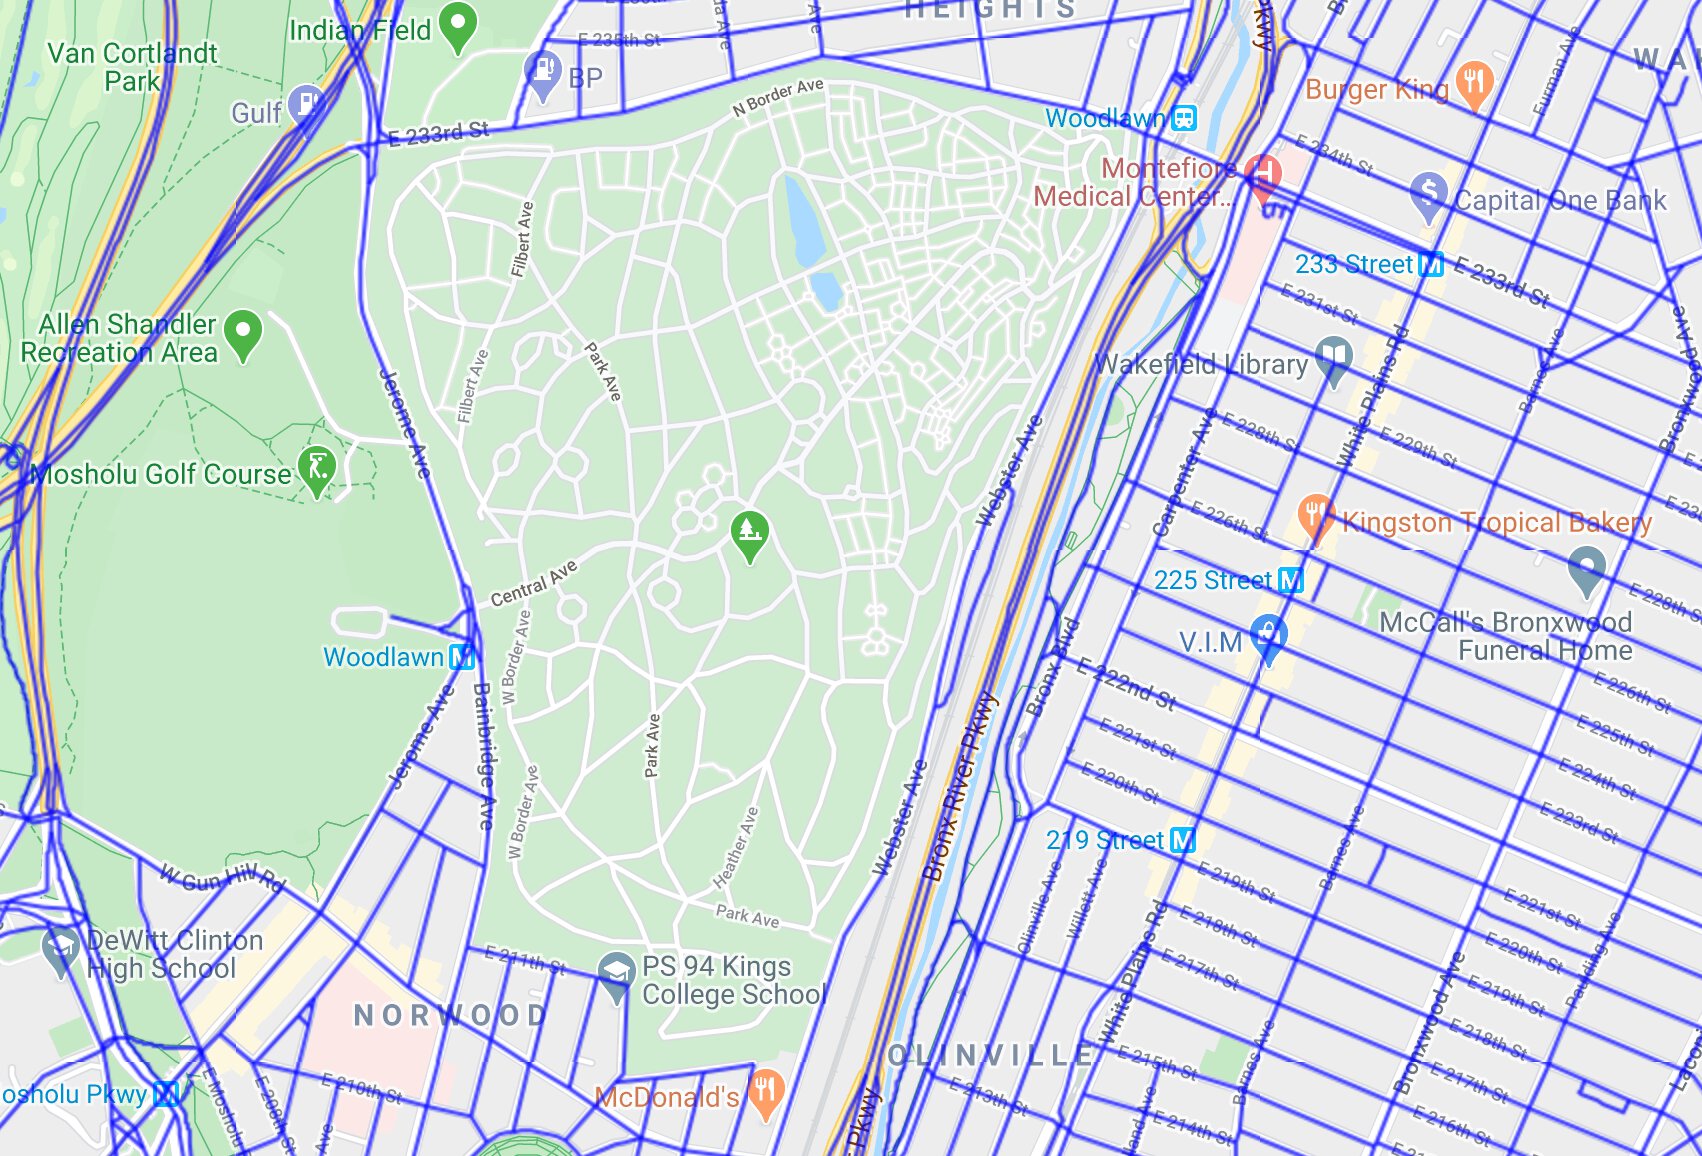 a screenshot NYC Centerline on a park in the Bronx. Road data is missing, but the map shows that there are in fact streets.